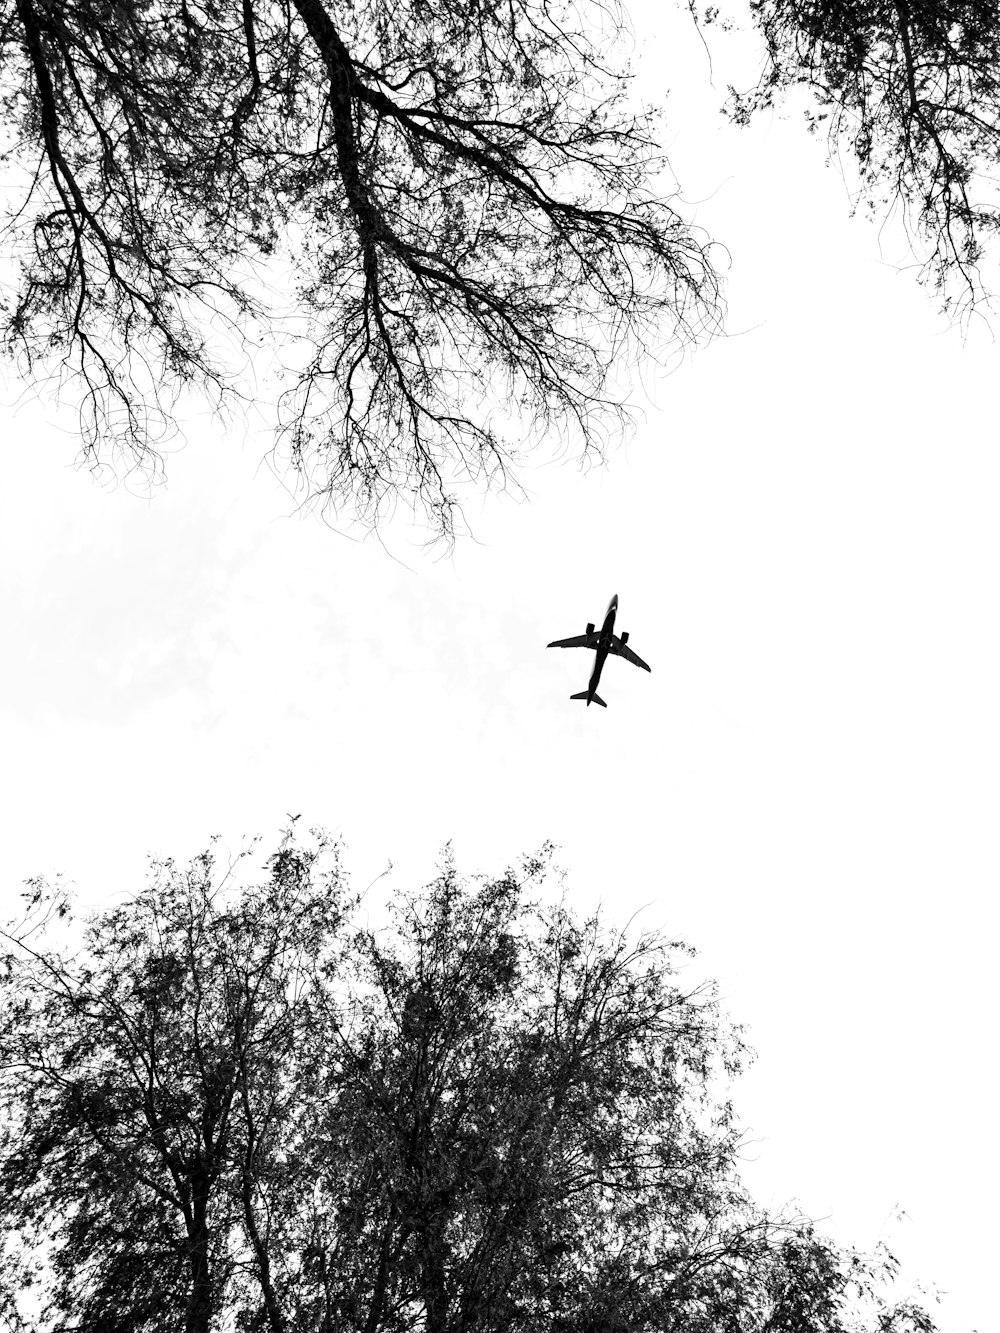 an airplane is flying through the sky above the trees